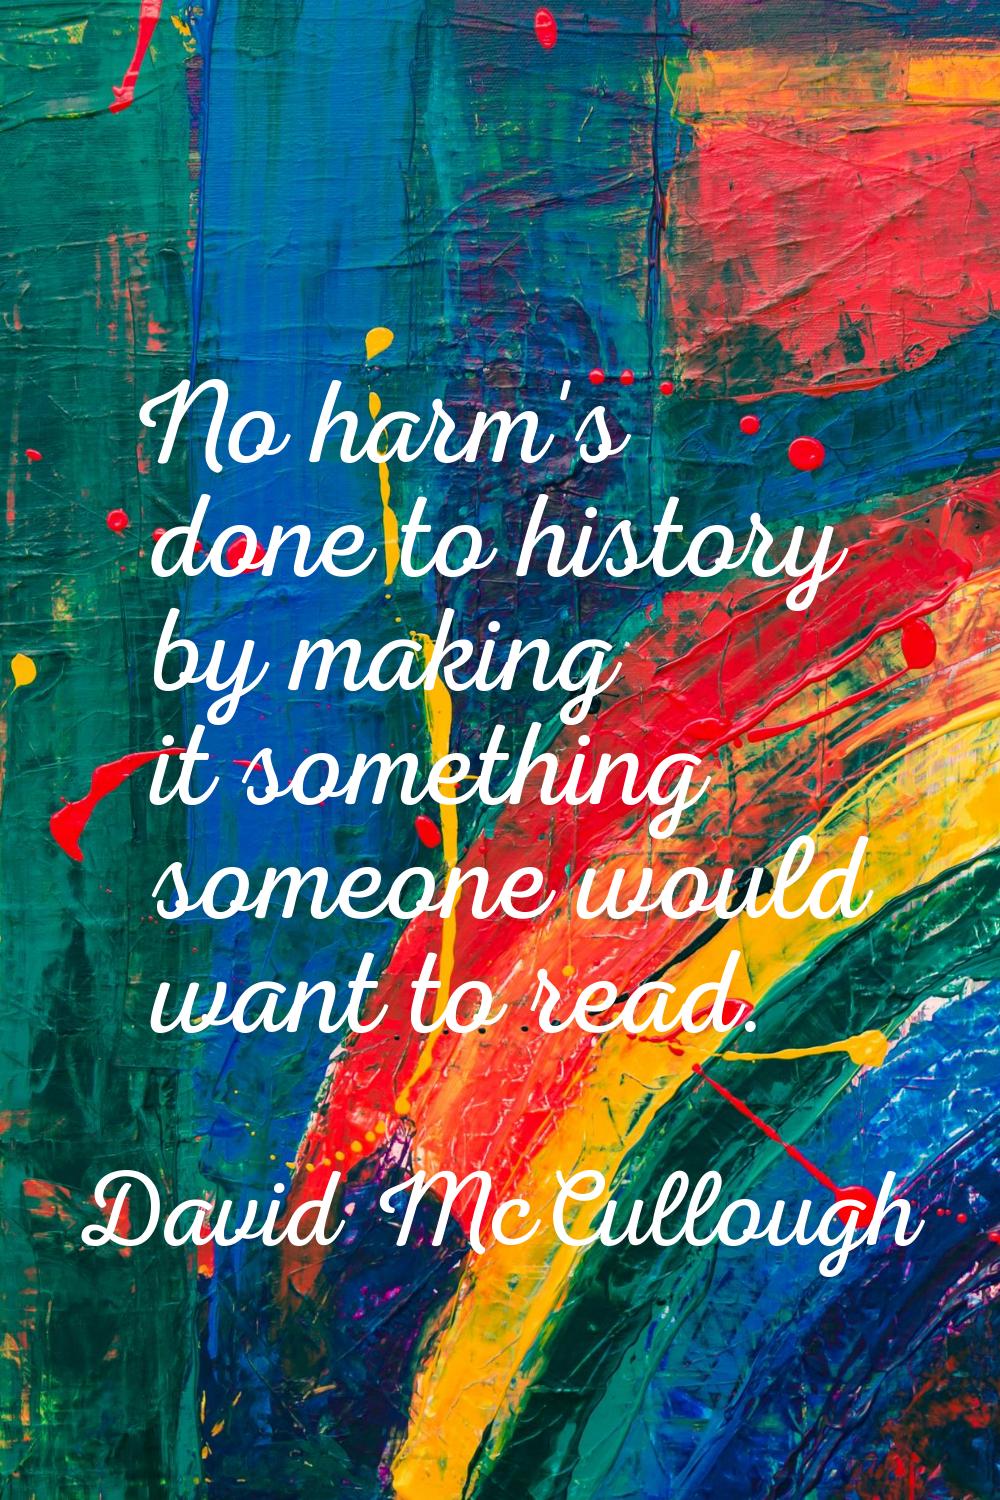 No harm's done to history by making it something someone would want to read.